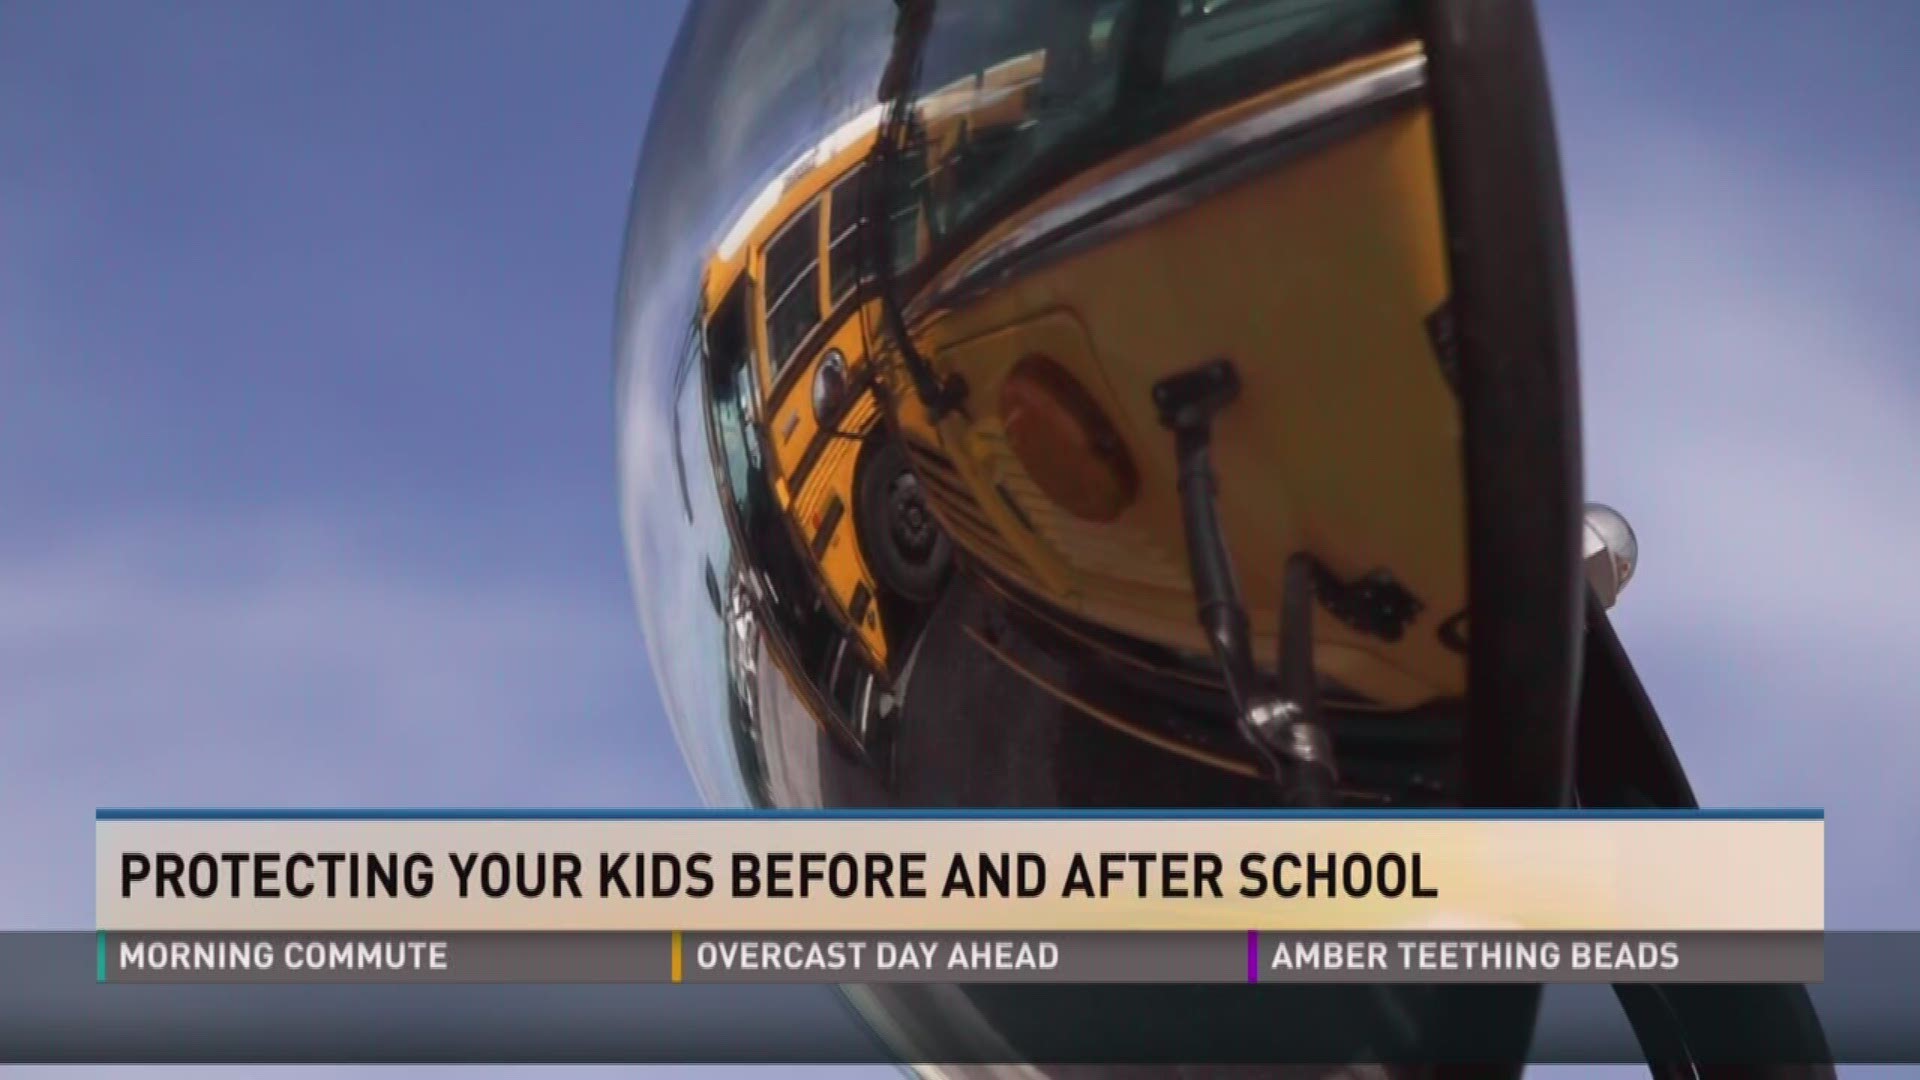 Protecting Your Kids Before and After School